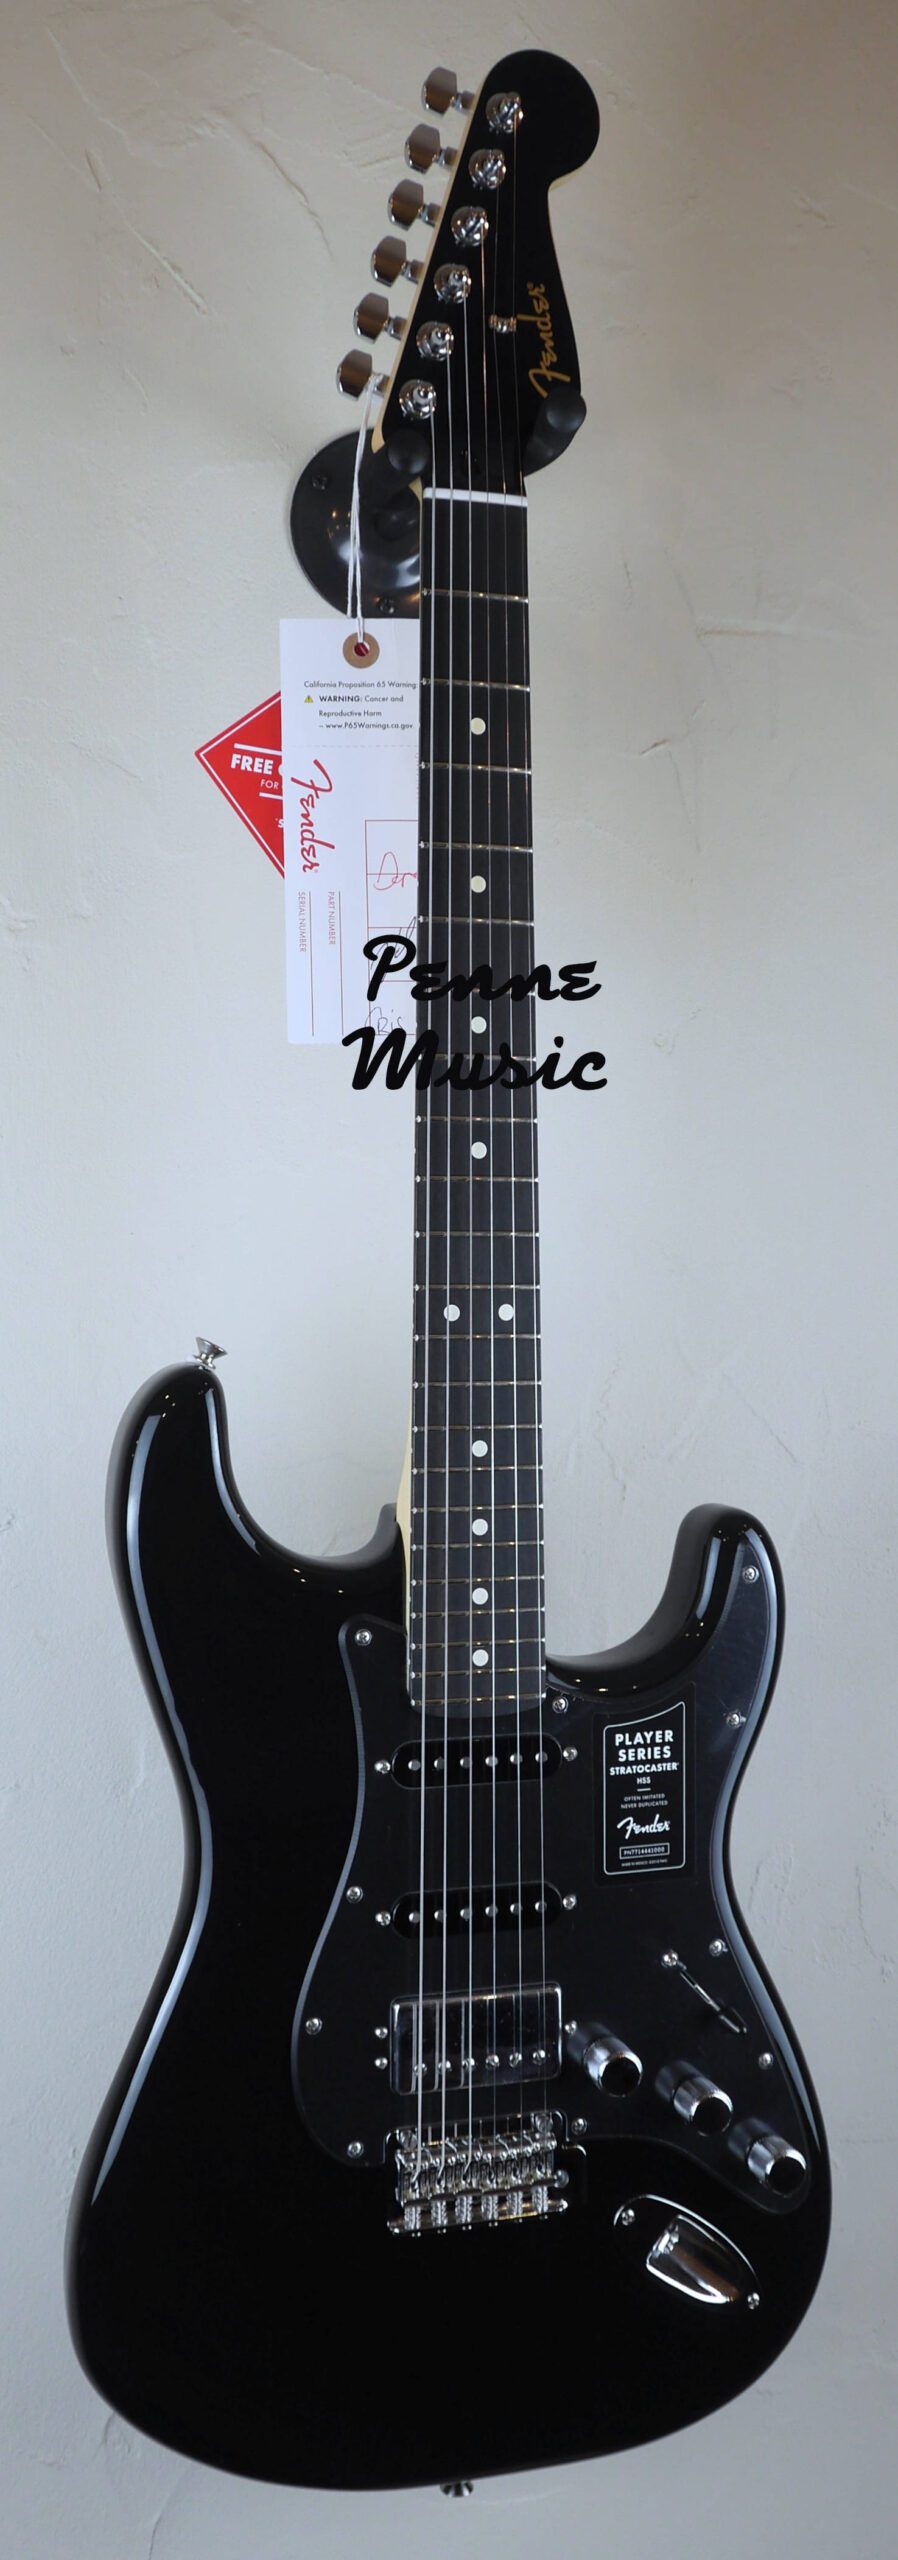 Fender Limited Edition Player Stratocaster HSS Black with Ebony Fingerboard 1